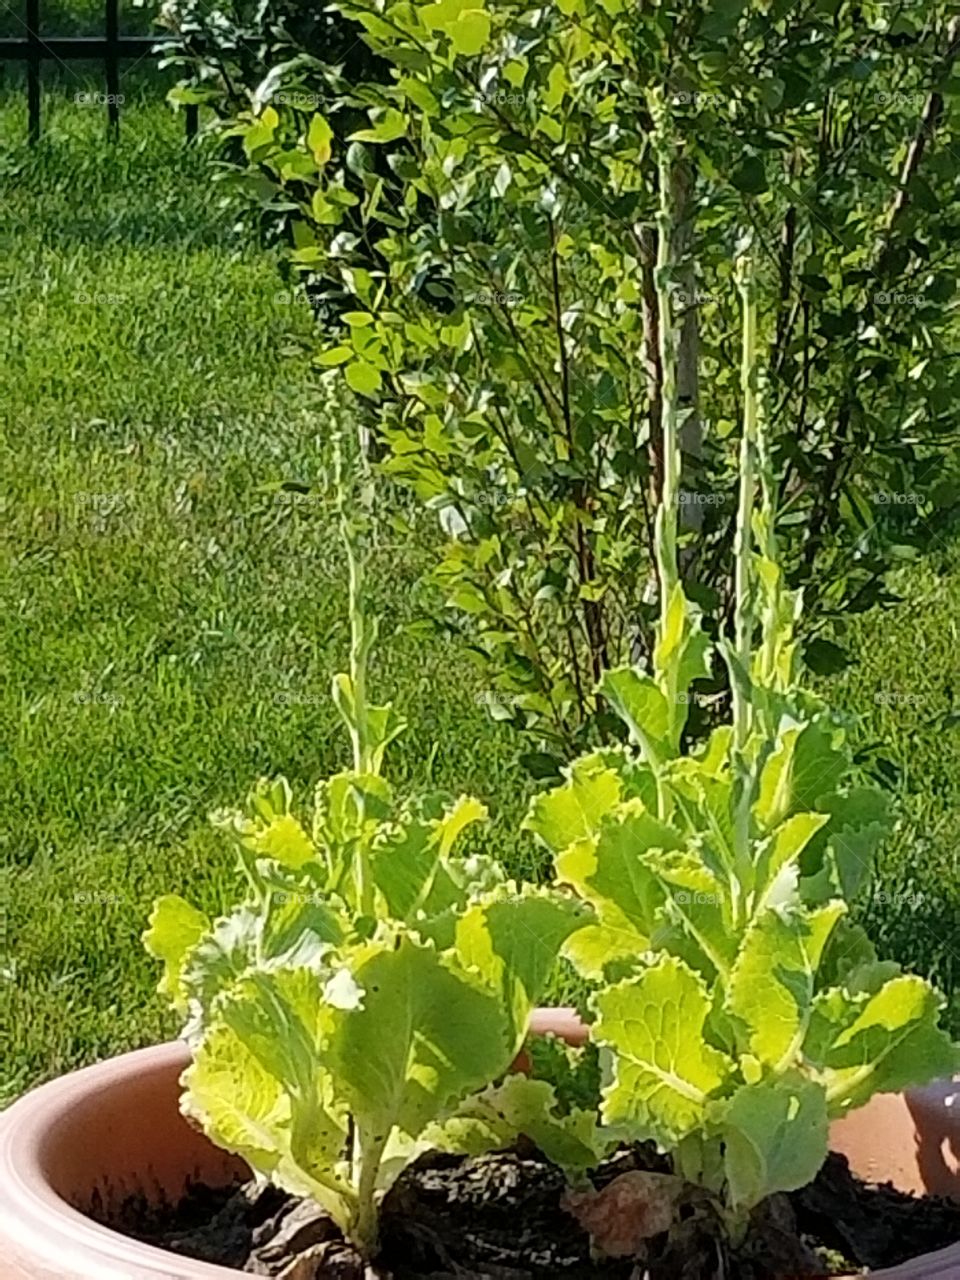 Lettuce that is starting to bloom